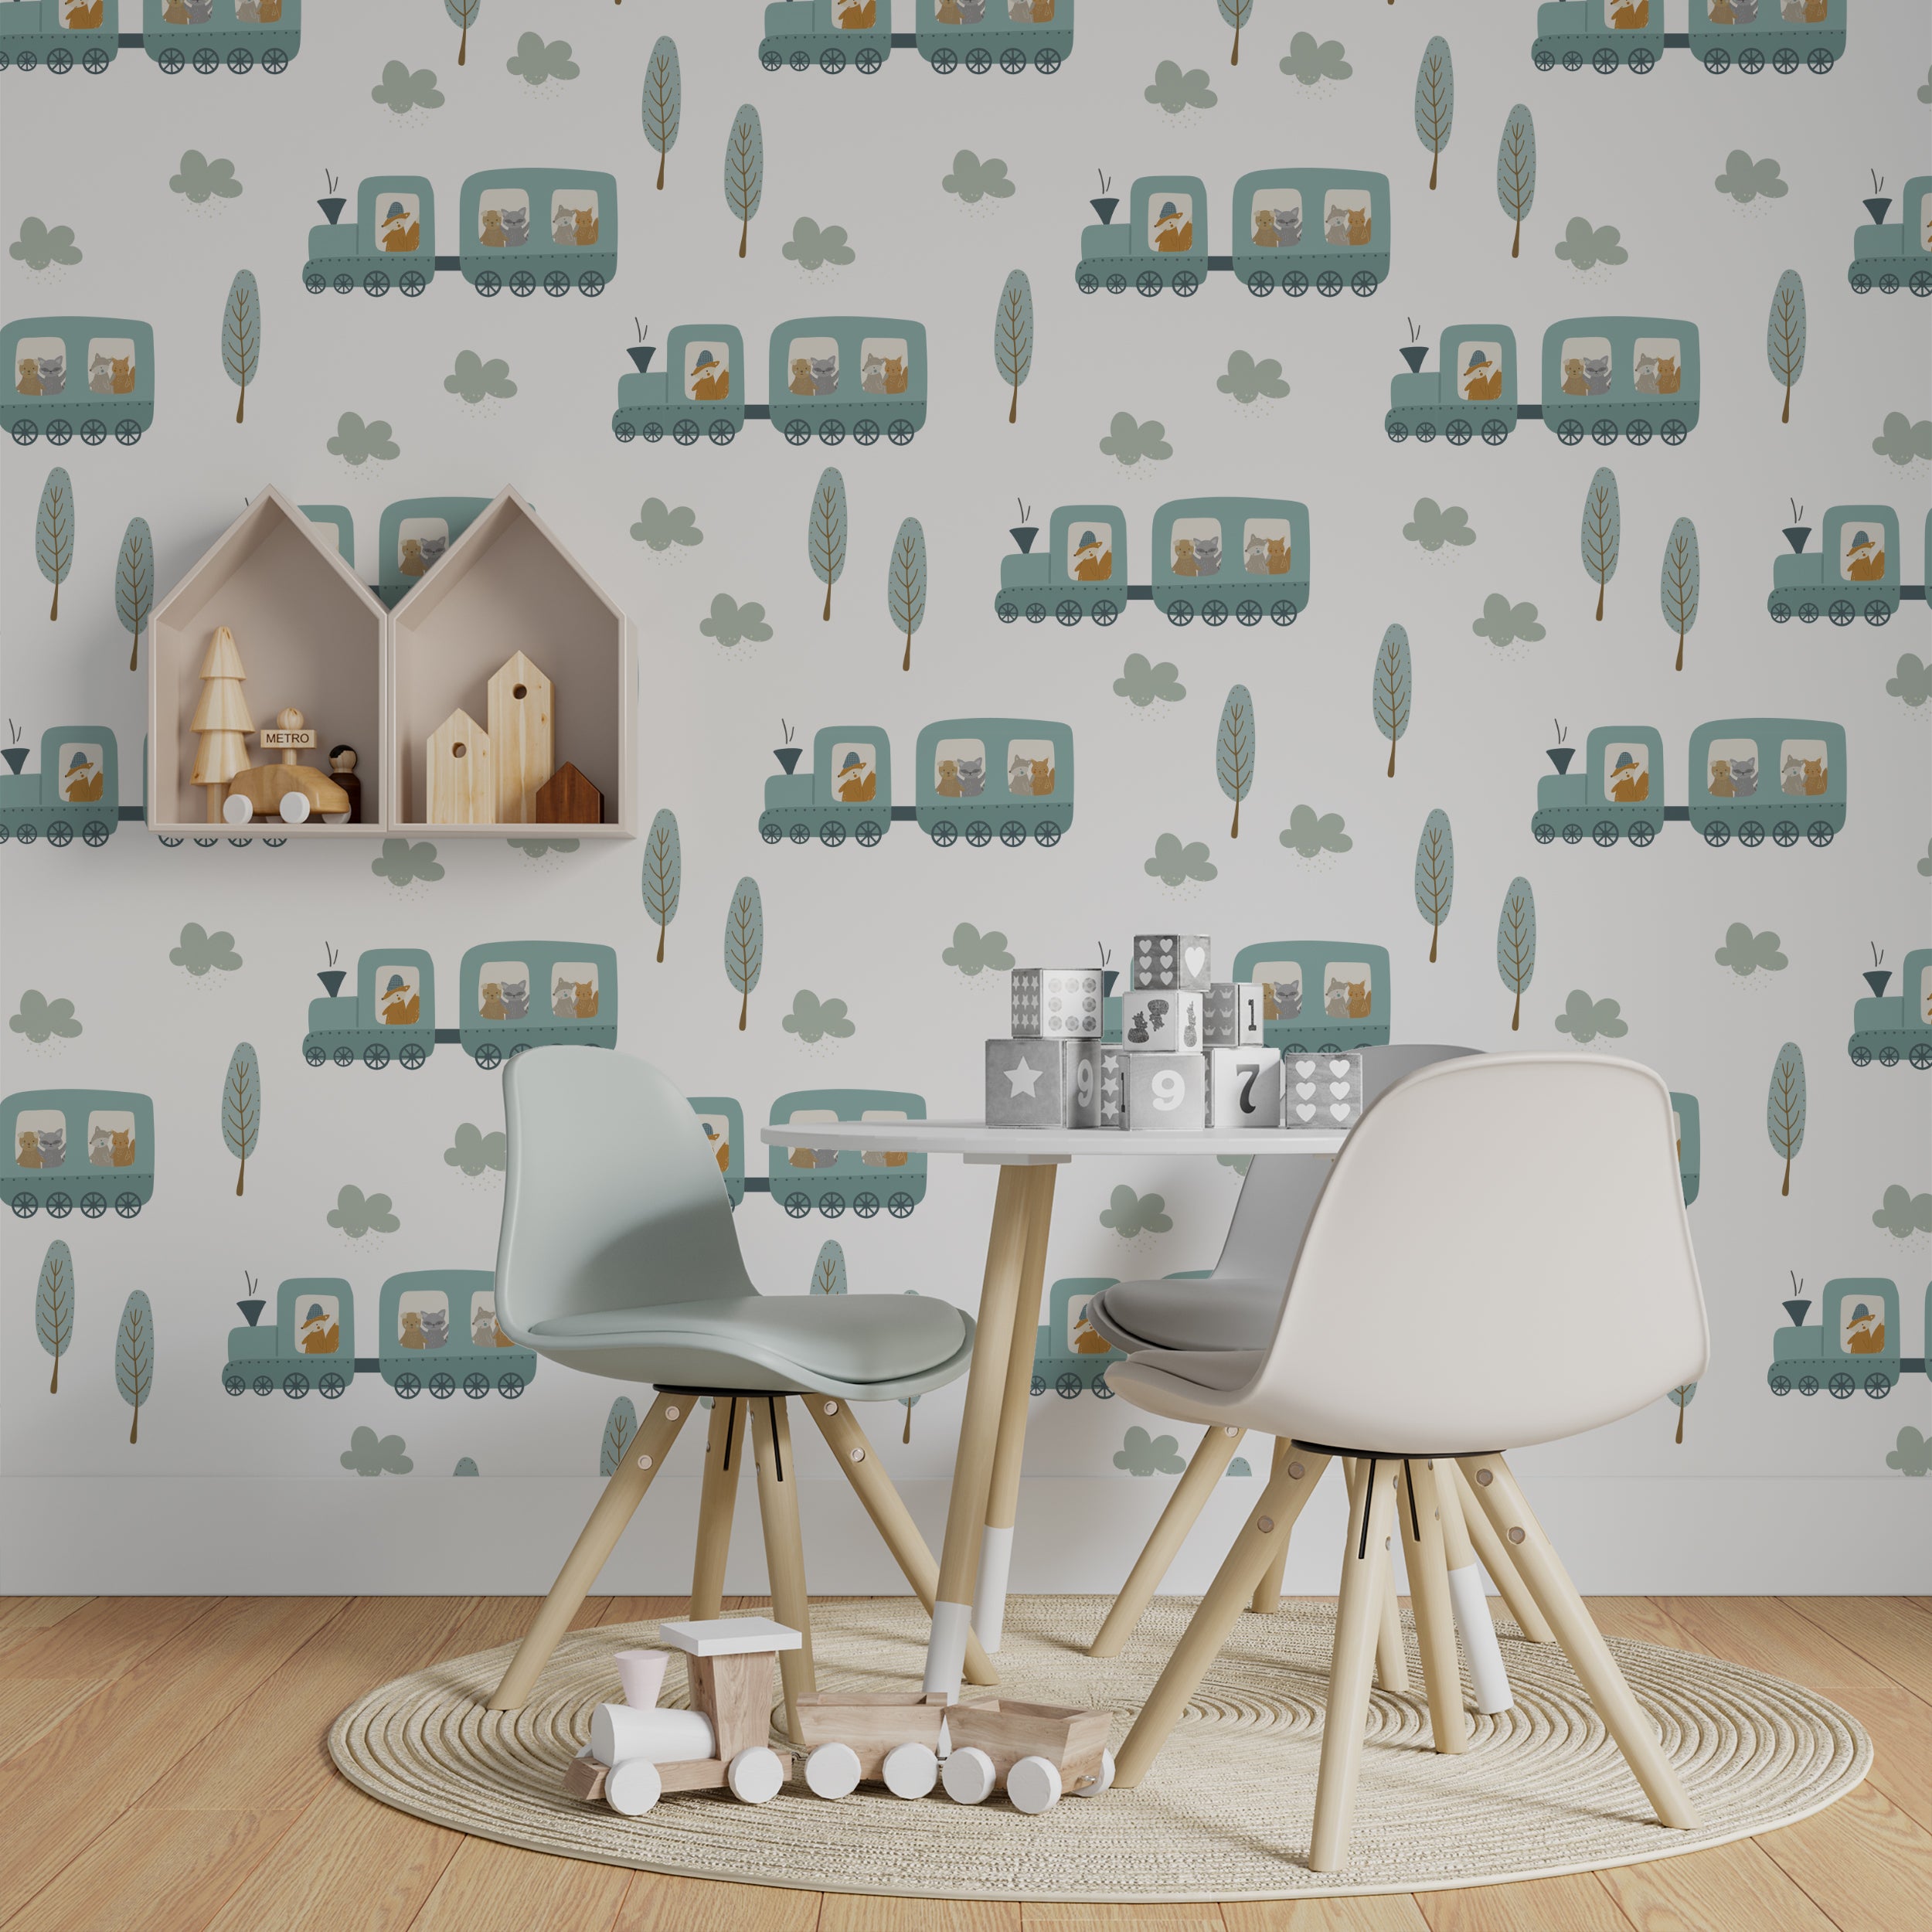 A playful children's room scene featuring the All Aboard Wallpaper, which is adorned with a charming pattern of trains carrying animals in various carts. The soft gray and blue tones create a gentle and fun backdrop, complemented by minimalist wooden furniture and playful toys, perfect for a child's play area.